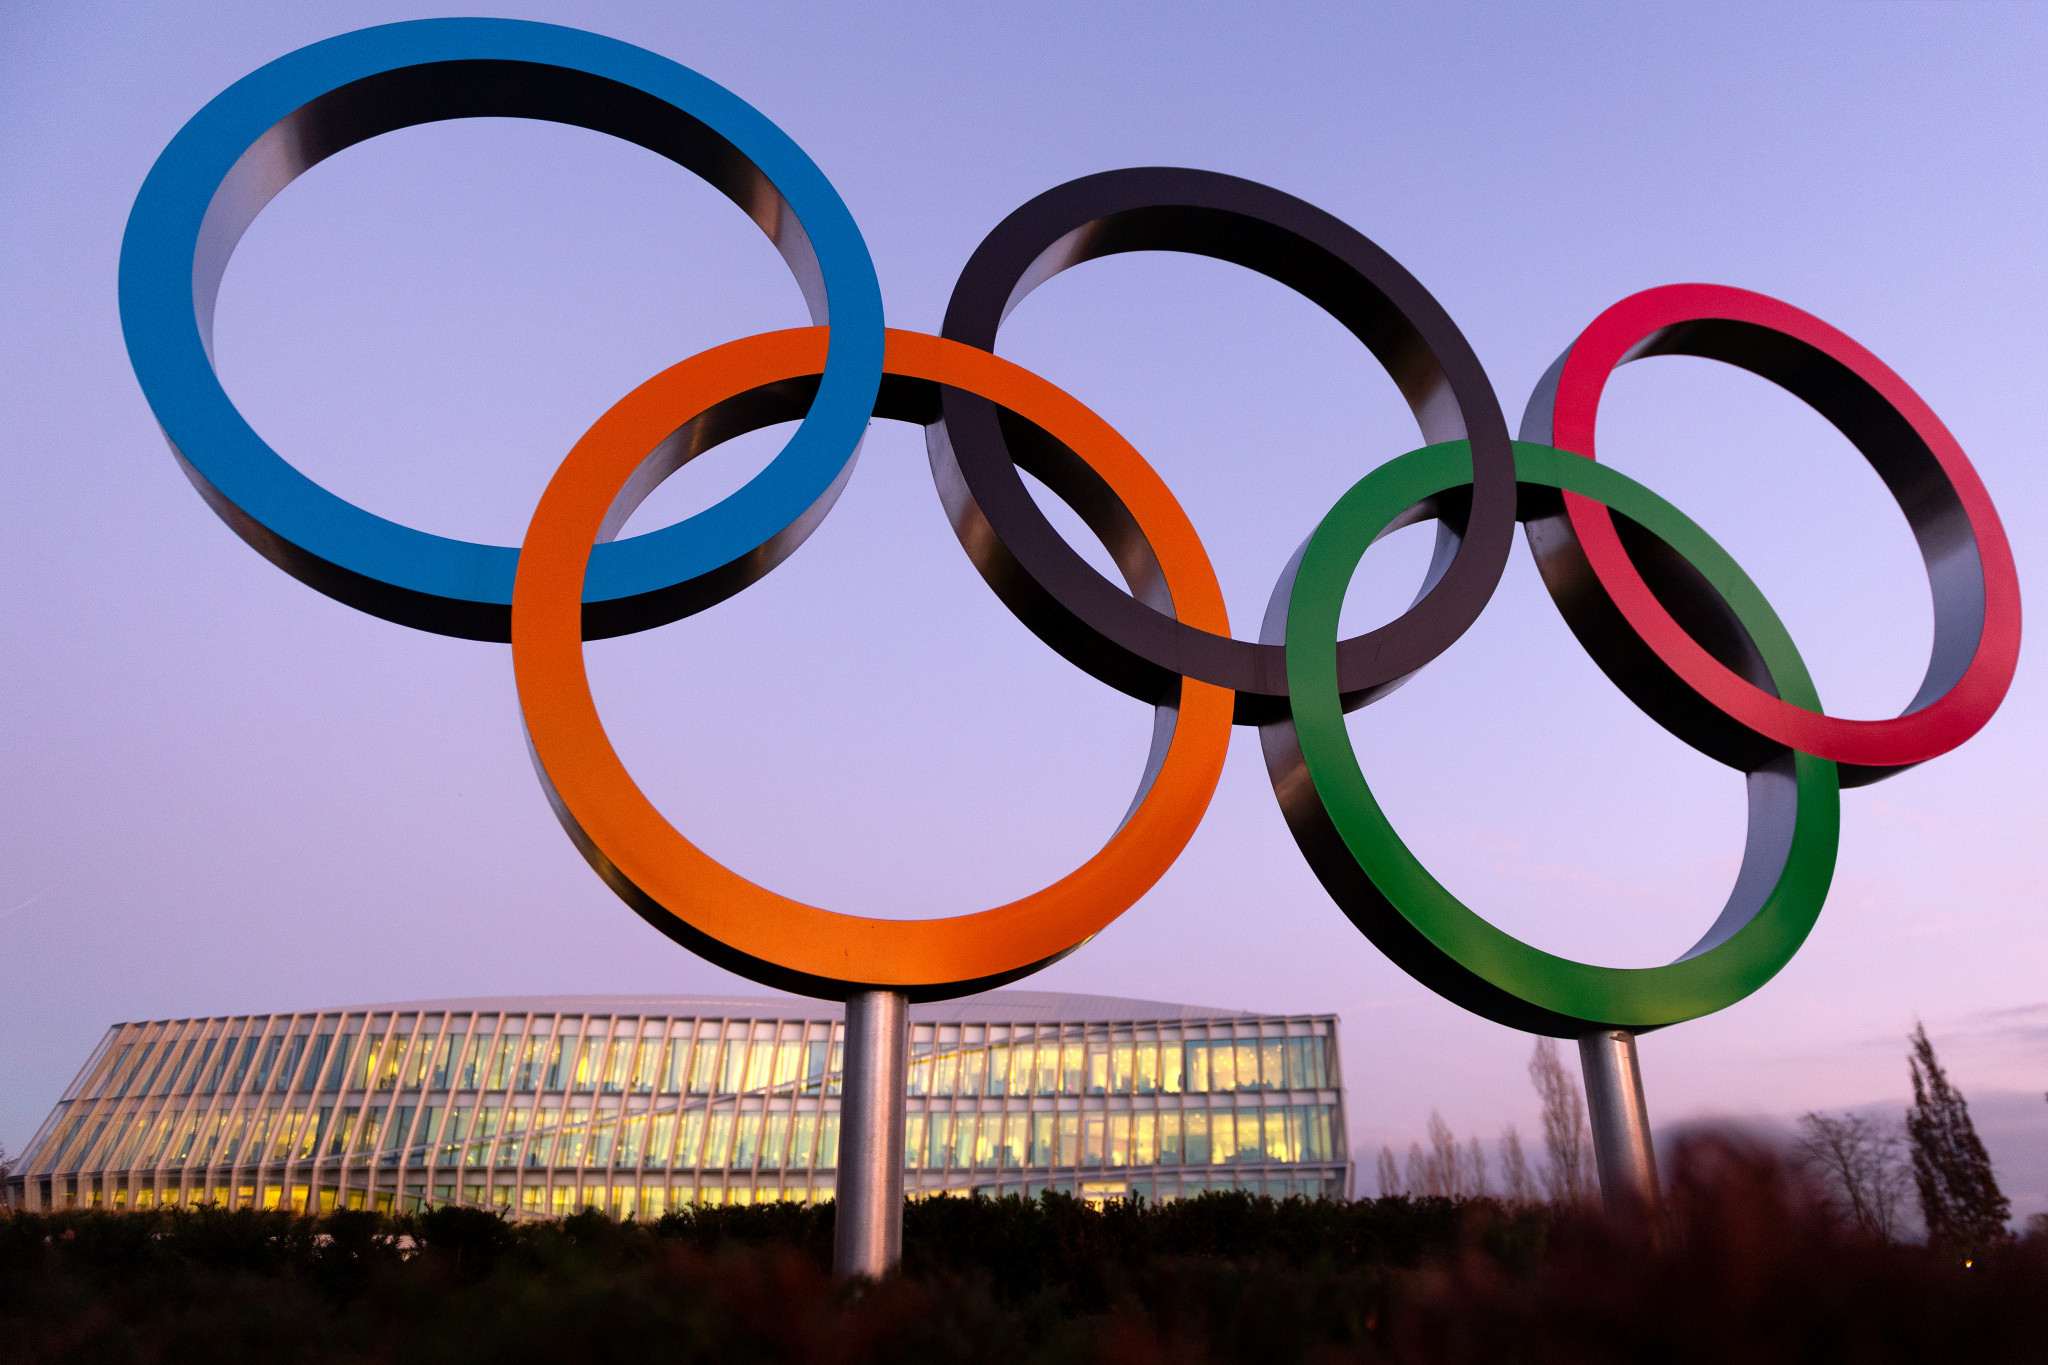 Developing virtual sports featured in the International Olympic Committee's Olympic Agenda 2020+5 ©Getty Images